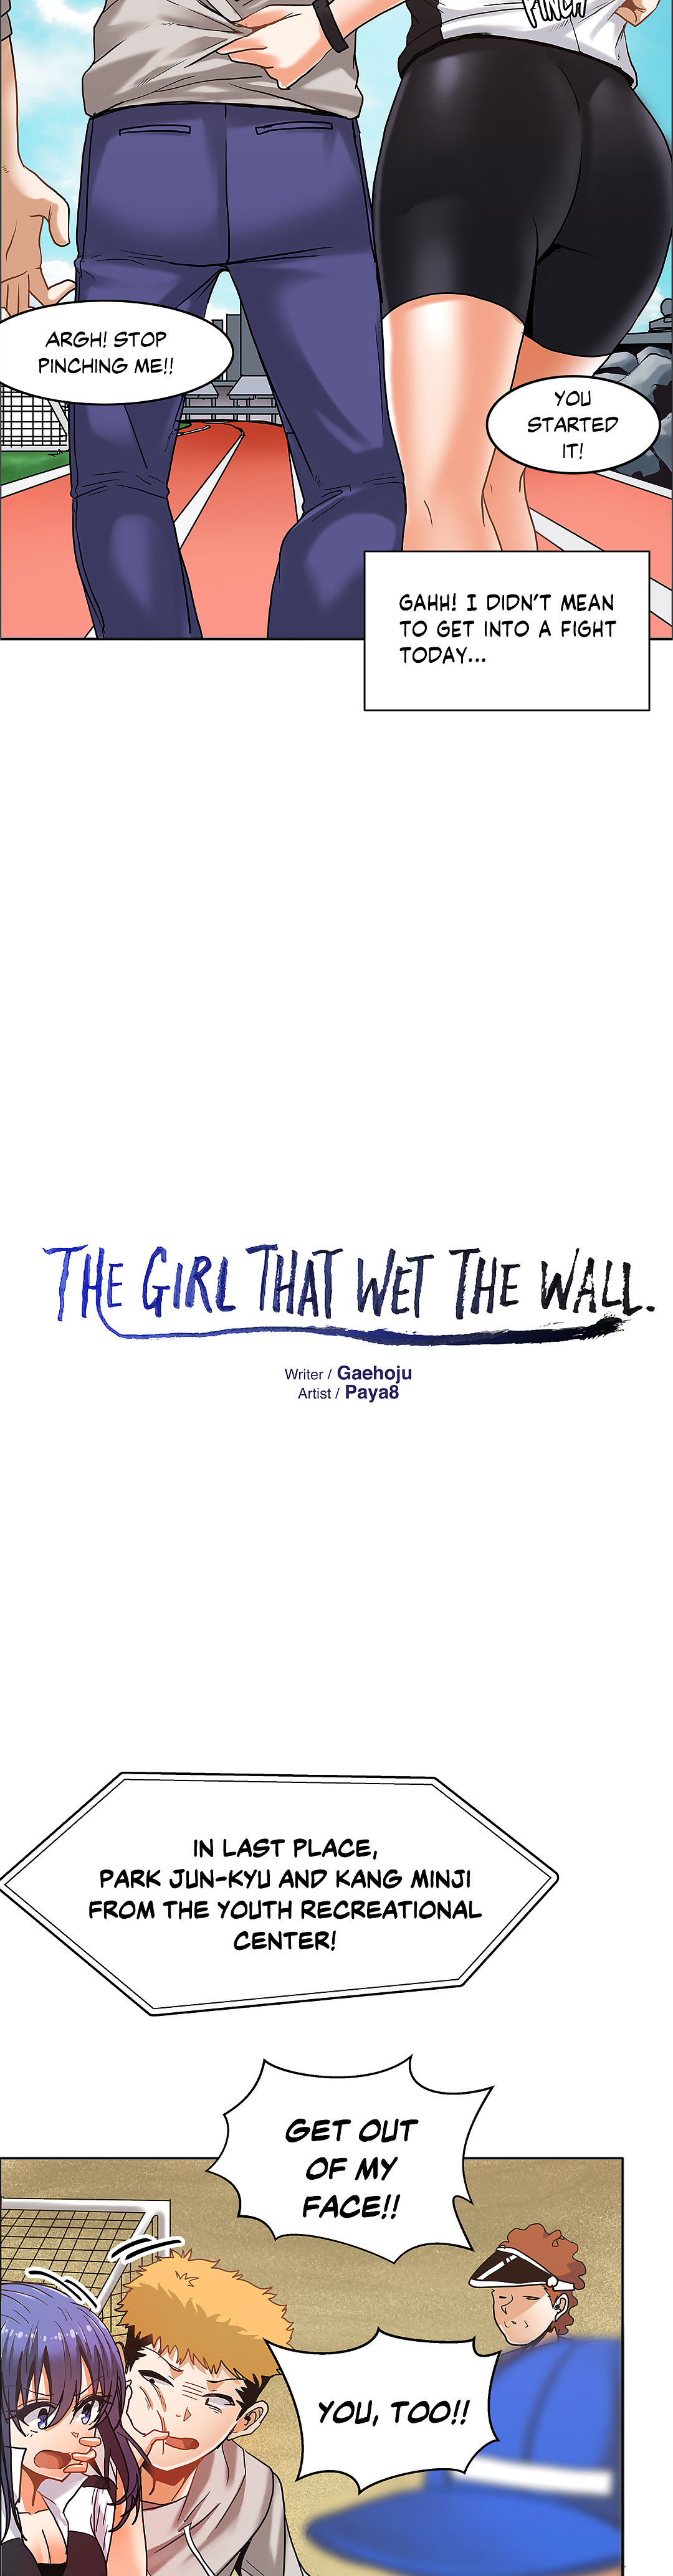 The Girl That Wet the Wall Ch 11 - 40 - part 14